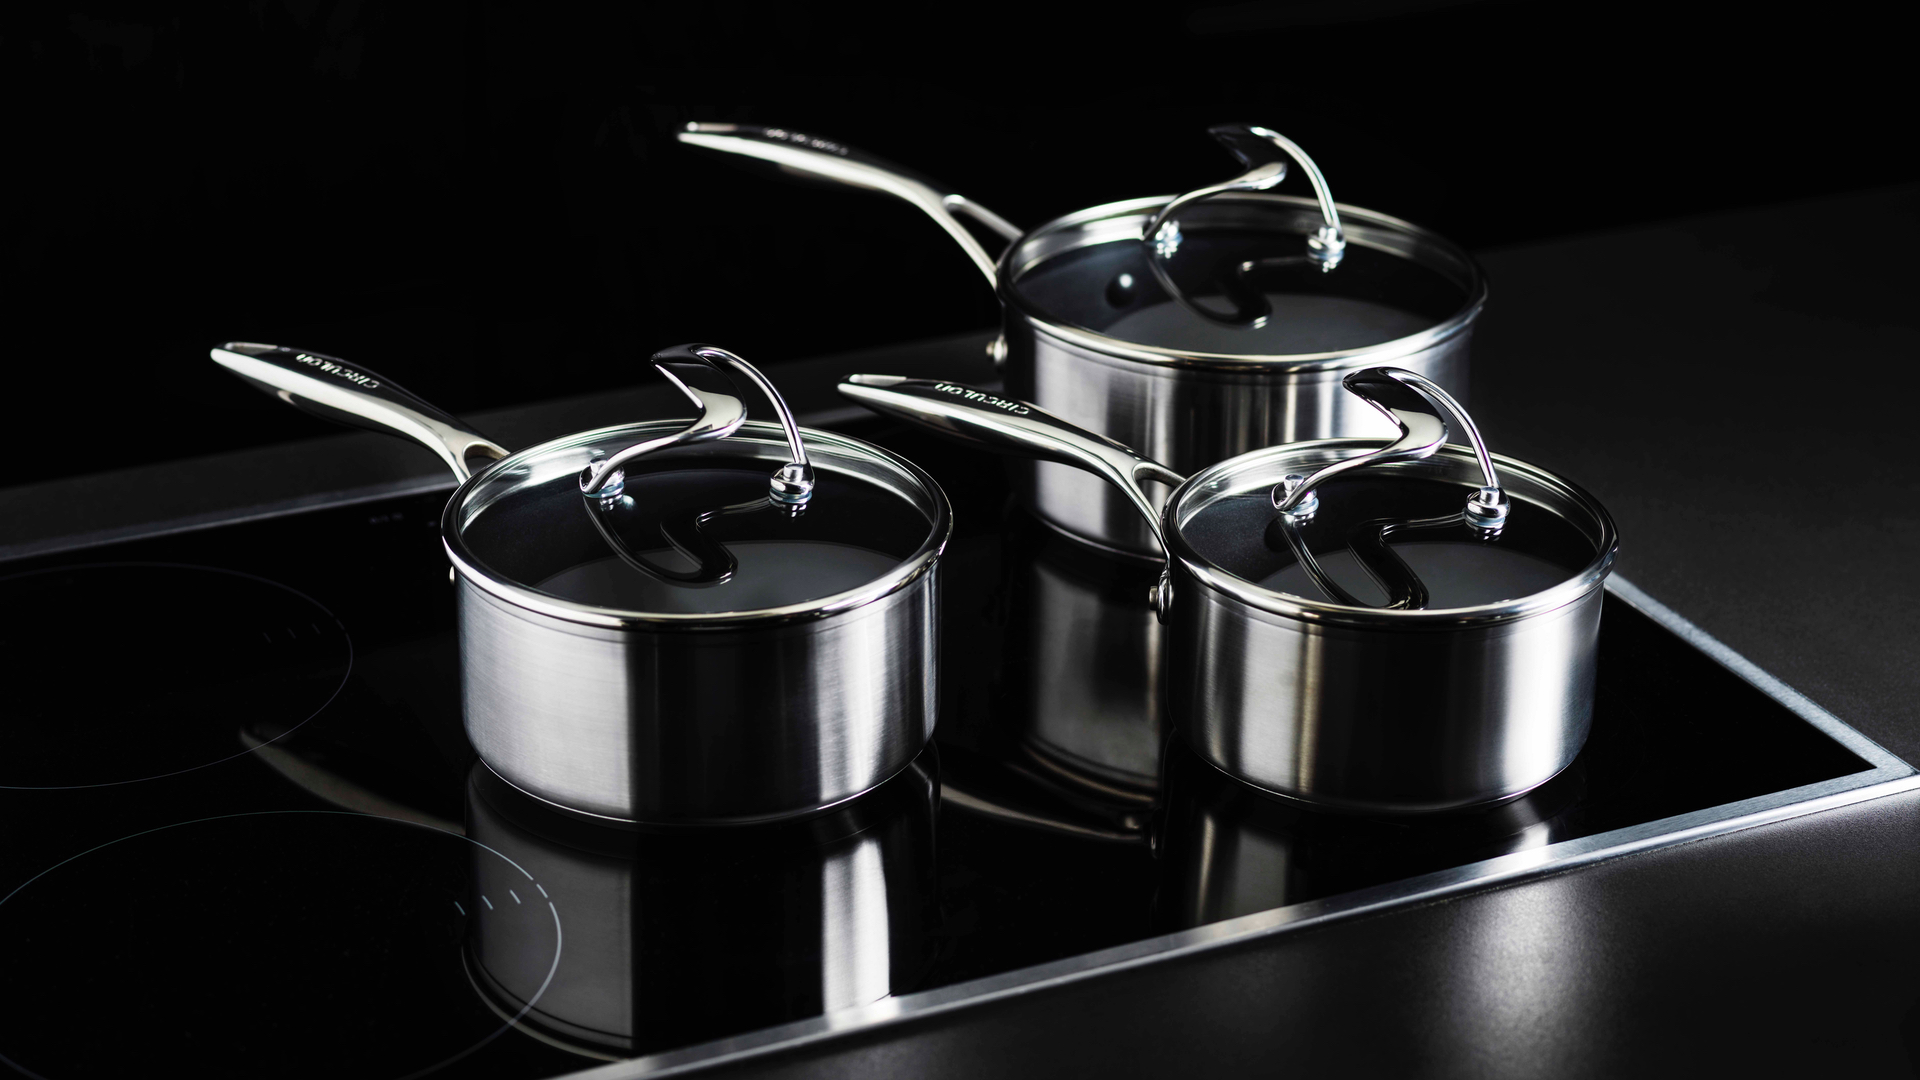 Circulon SteelShield Nonstick Stainless Steel C-Series 3 Piece Saucepan Set  review: hybrid pans for cultured cooks